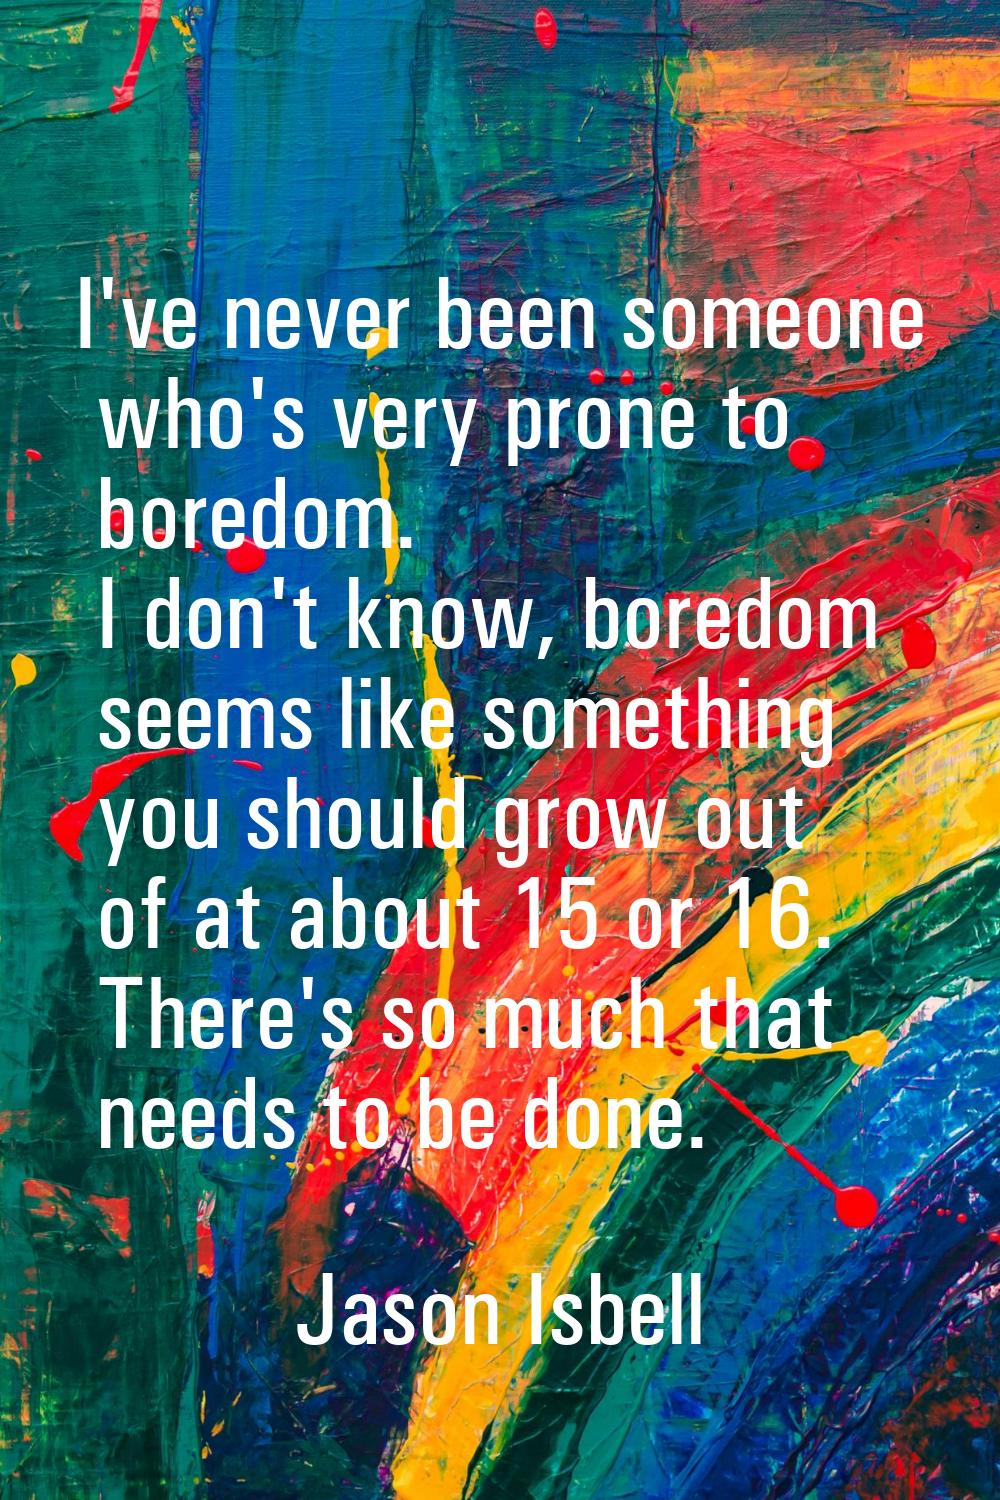 I've never been someone who's very prone to boredom. I don't know, boredom seems like something you